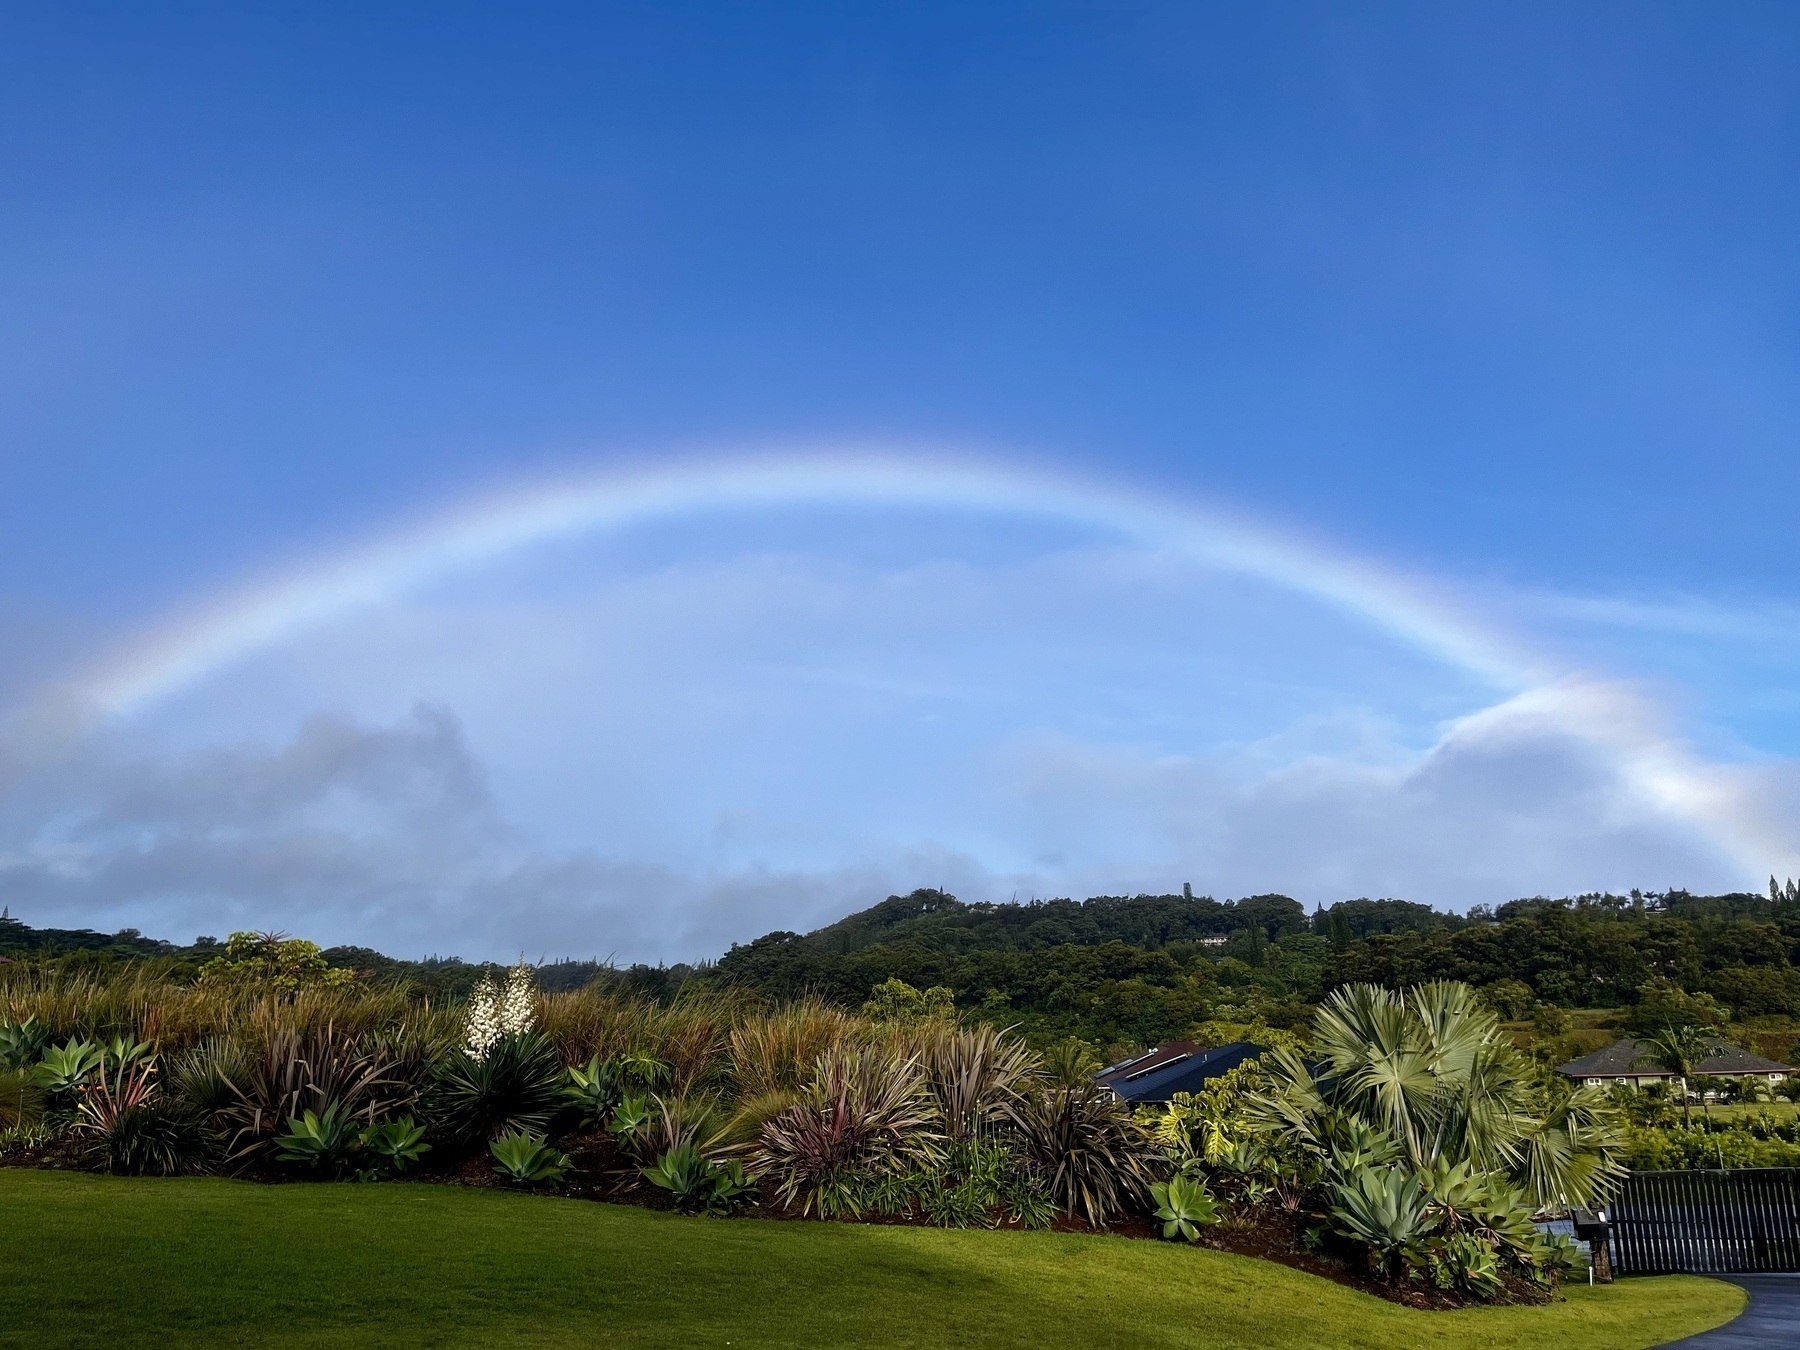 A rainbow against a blue sky and above green hill, in the foreground is a bed of various shrubs and a lawn